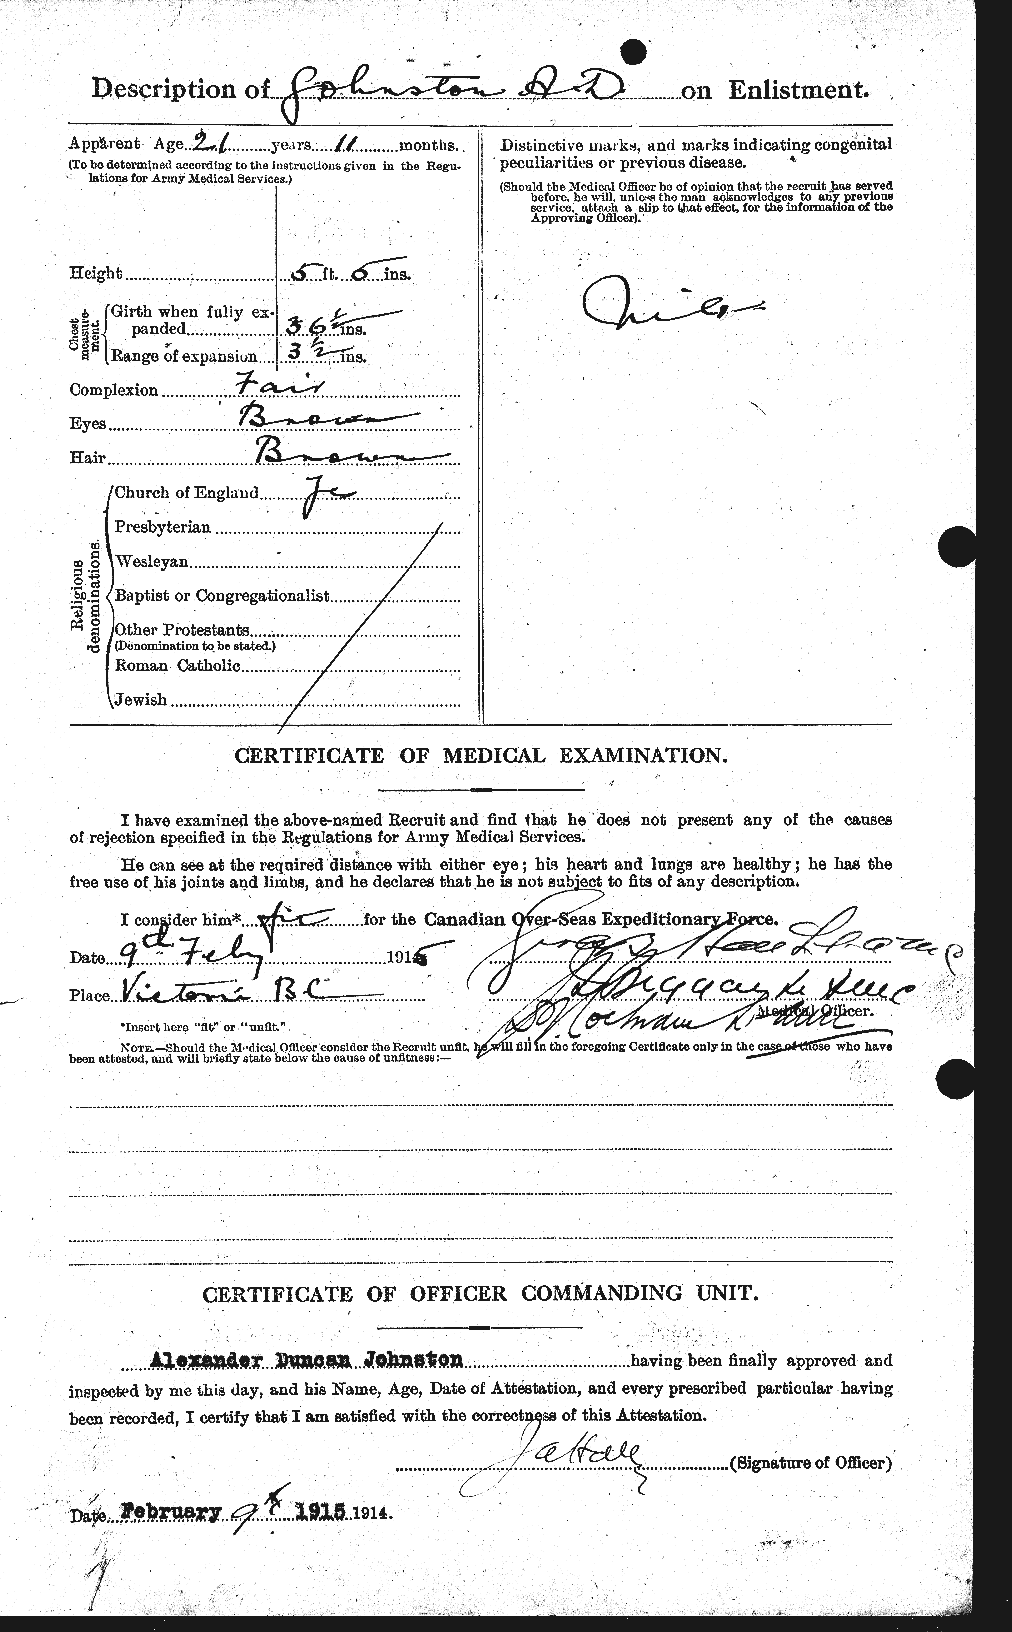 Personnel Records of the First World War - CEF 420972b